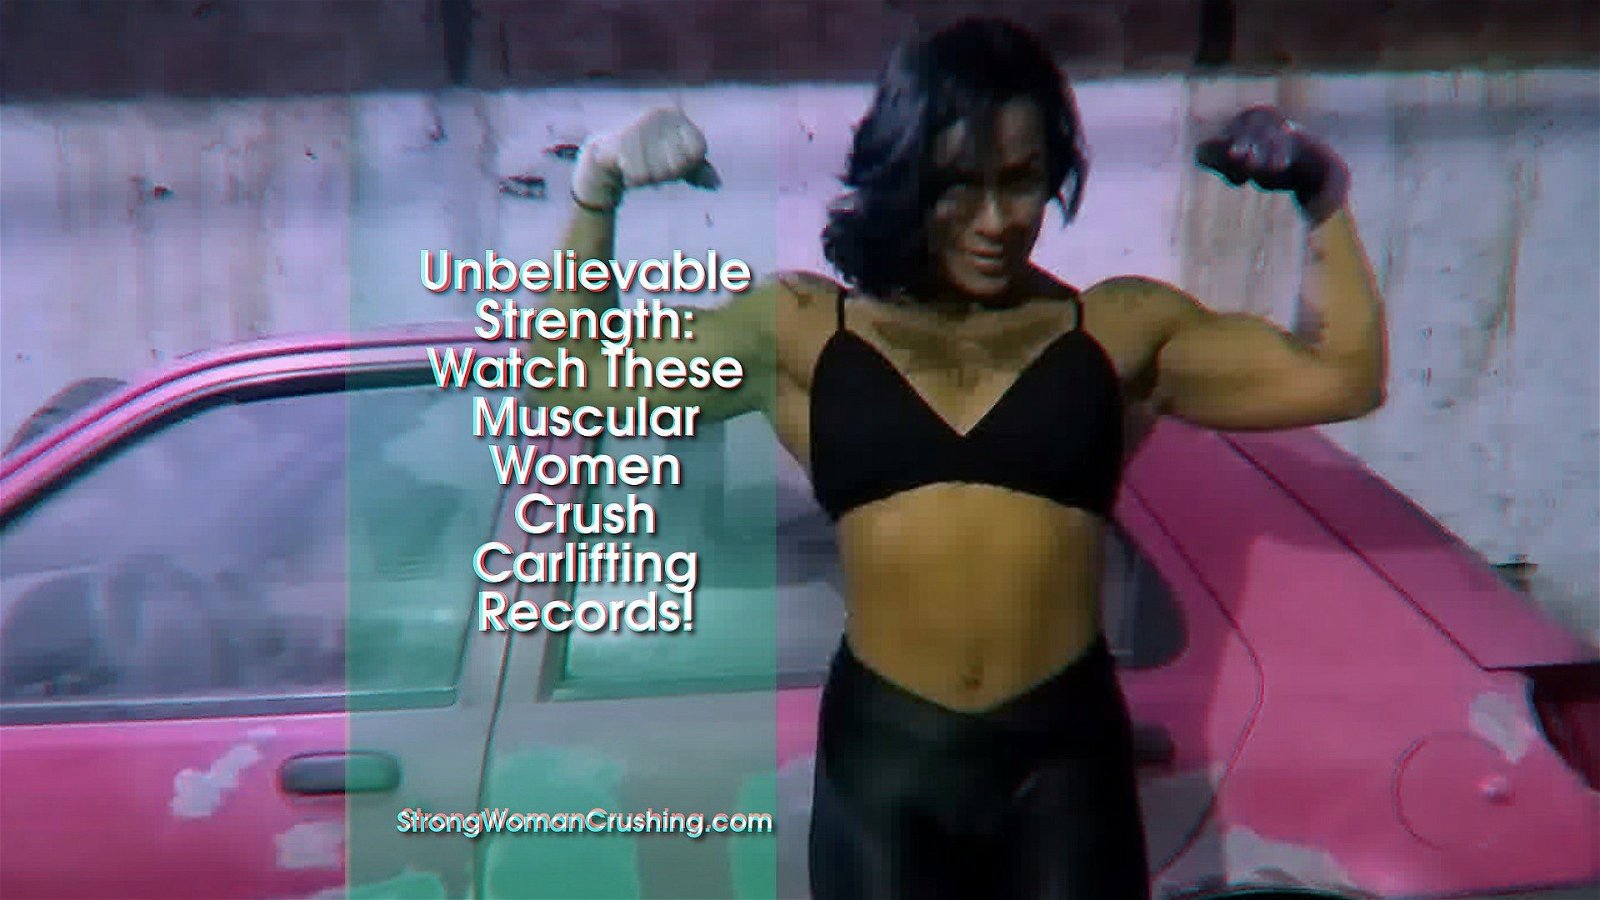 Watch the Photo by MusclegirlStrength with the username @MusclegirlStrength, who is a brand user, posted on March 5, 2024 and the text says 'Unbelievable Strength: Watch These Muscular Women Crush Carlifting Records!
Full Video: Fbbstrength.com

Indulge in the power and beauty of muscular female bodybuilders showcasing their strength through carlifting, bending metal, and flexing their..'